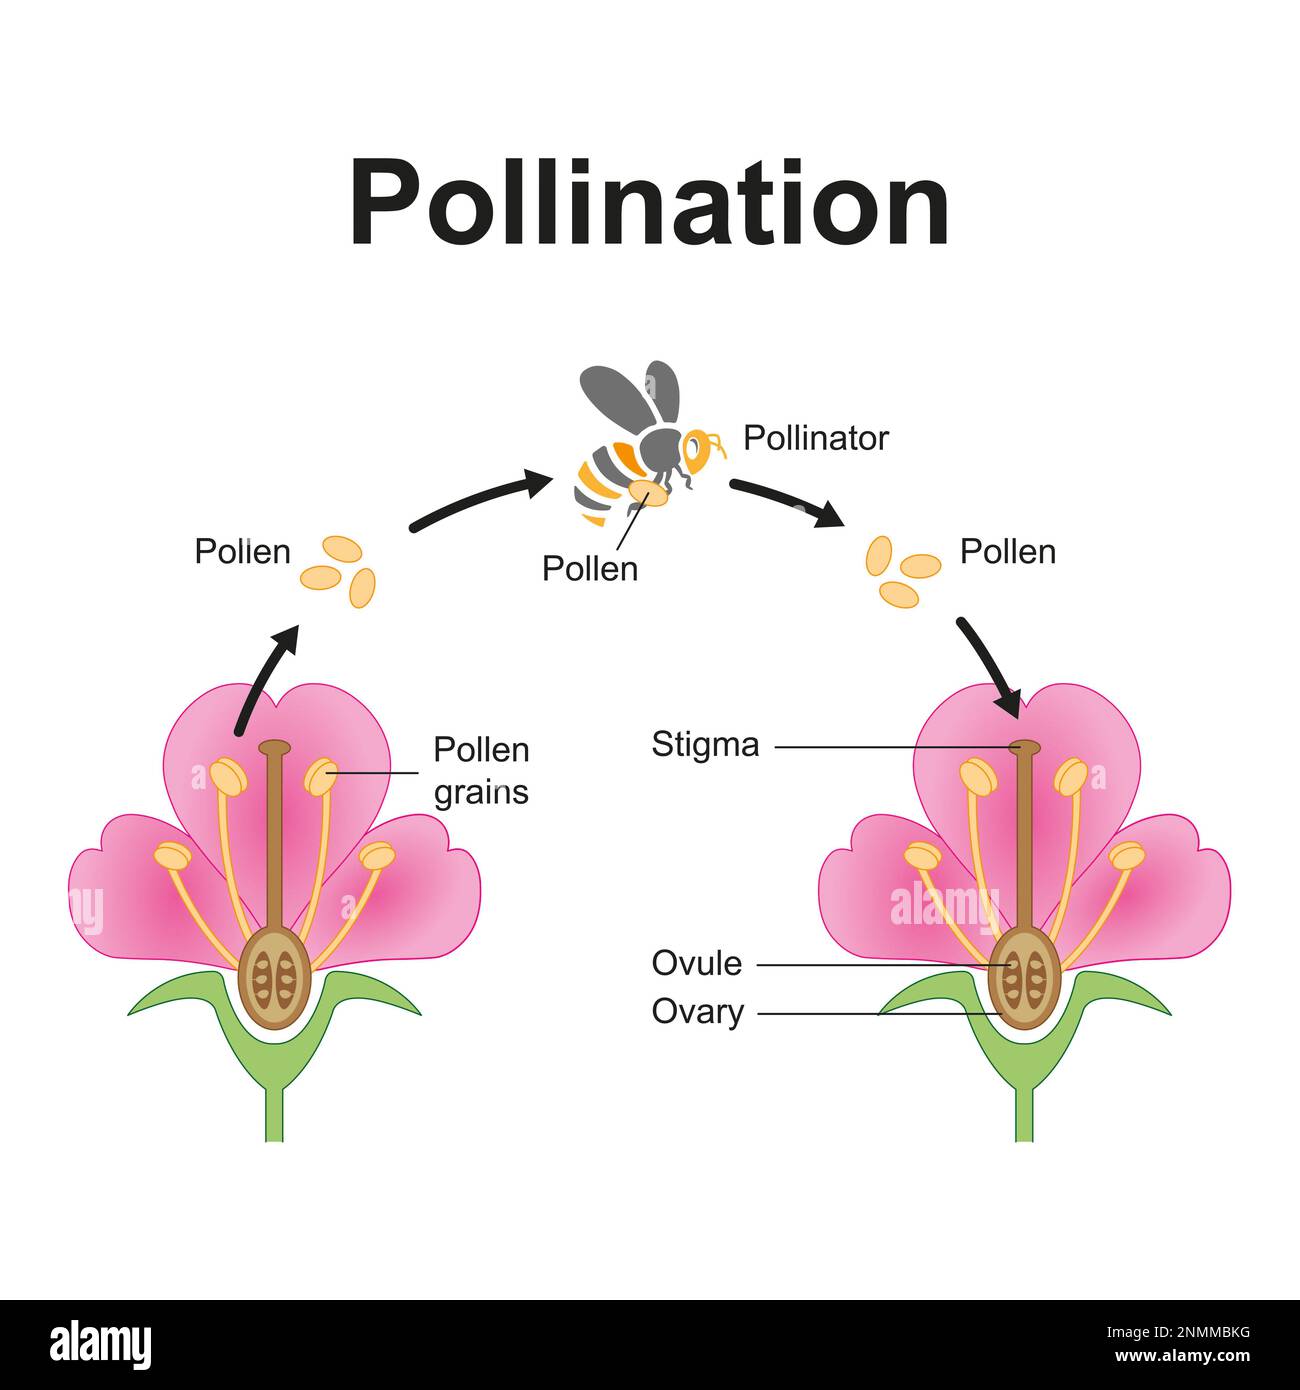 Insect pollination, illustration Stock Photo